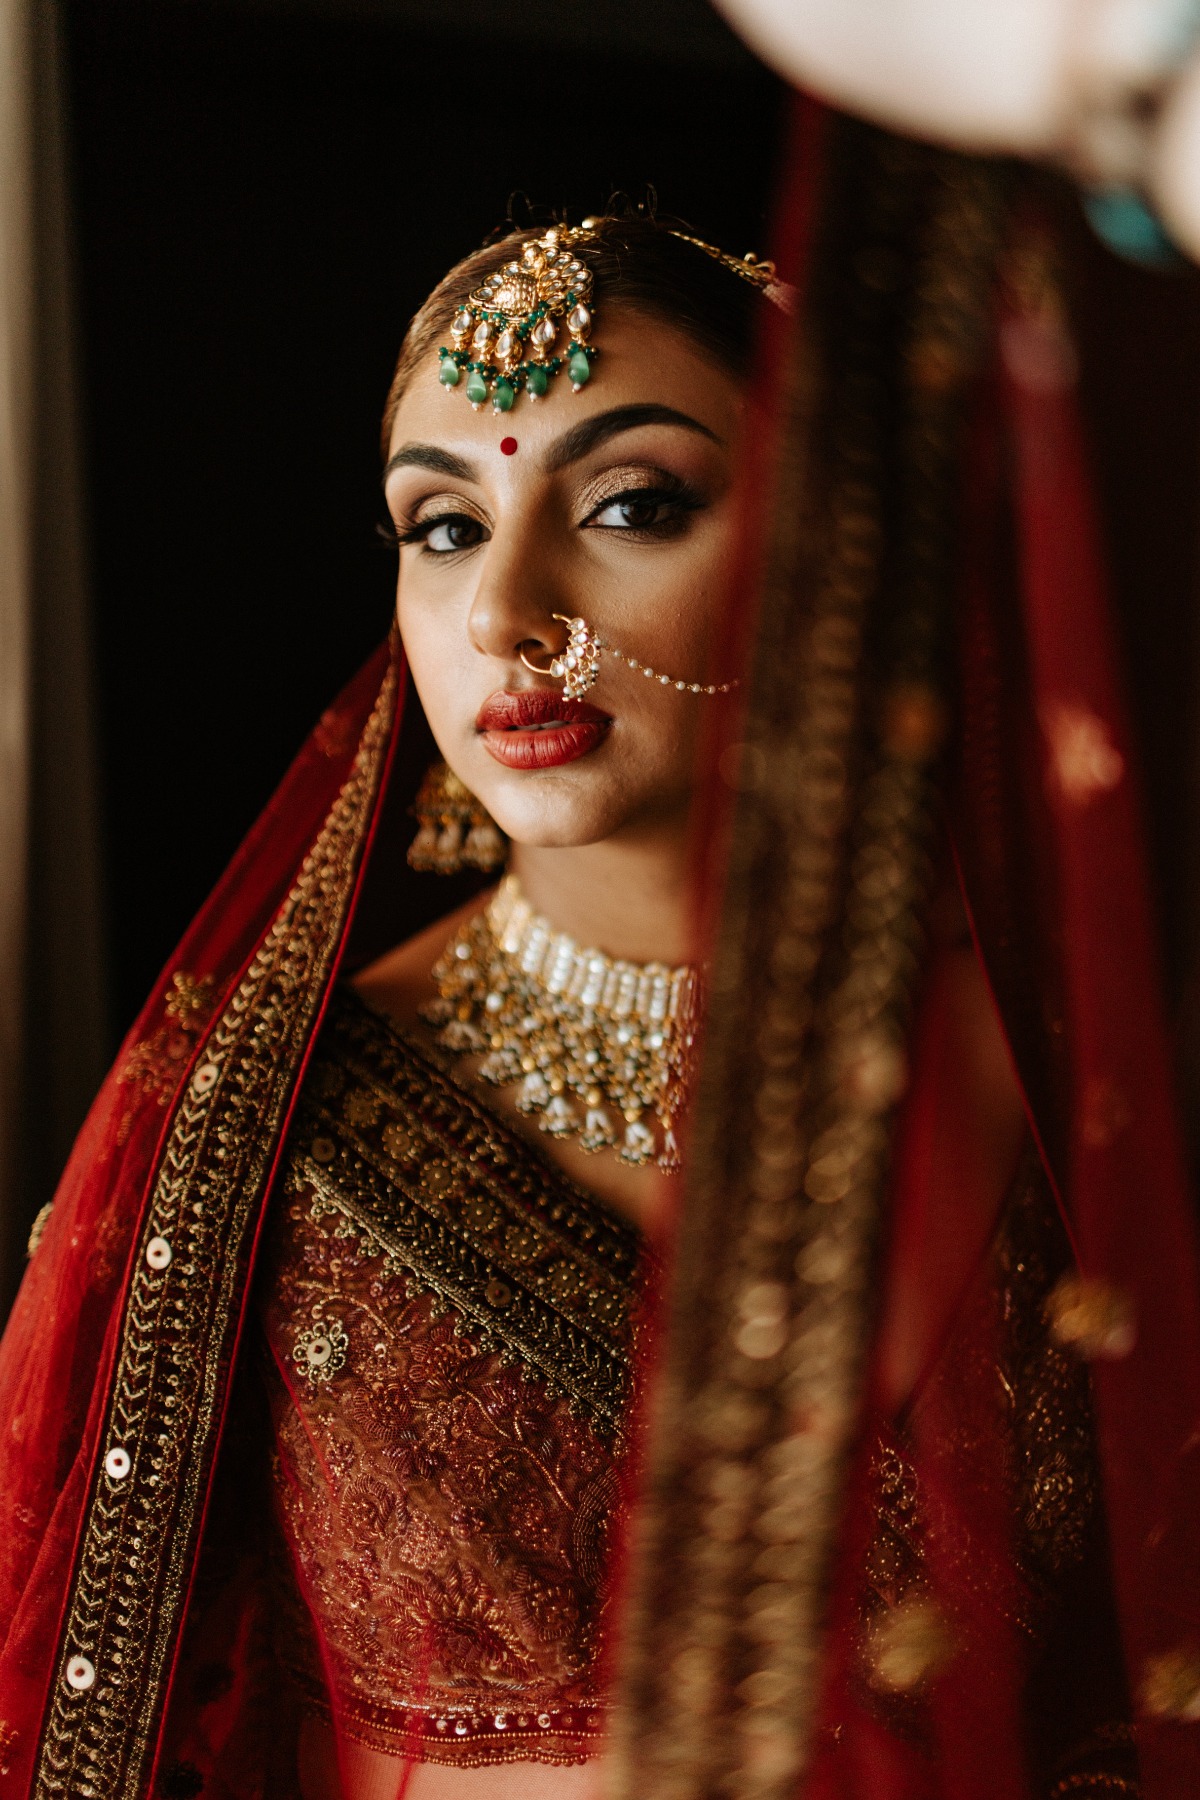 Indian bride in red and gold sari